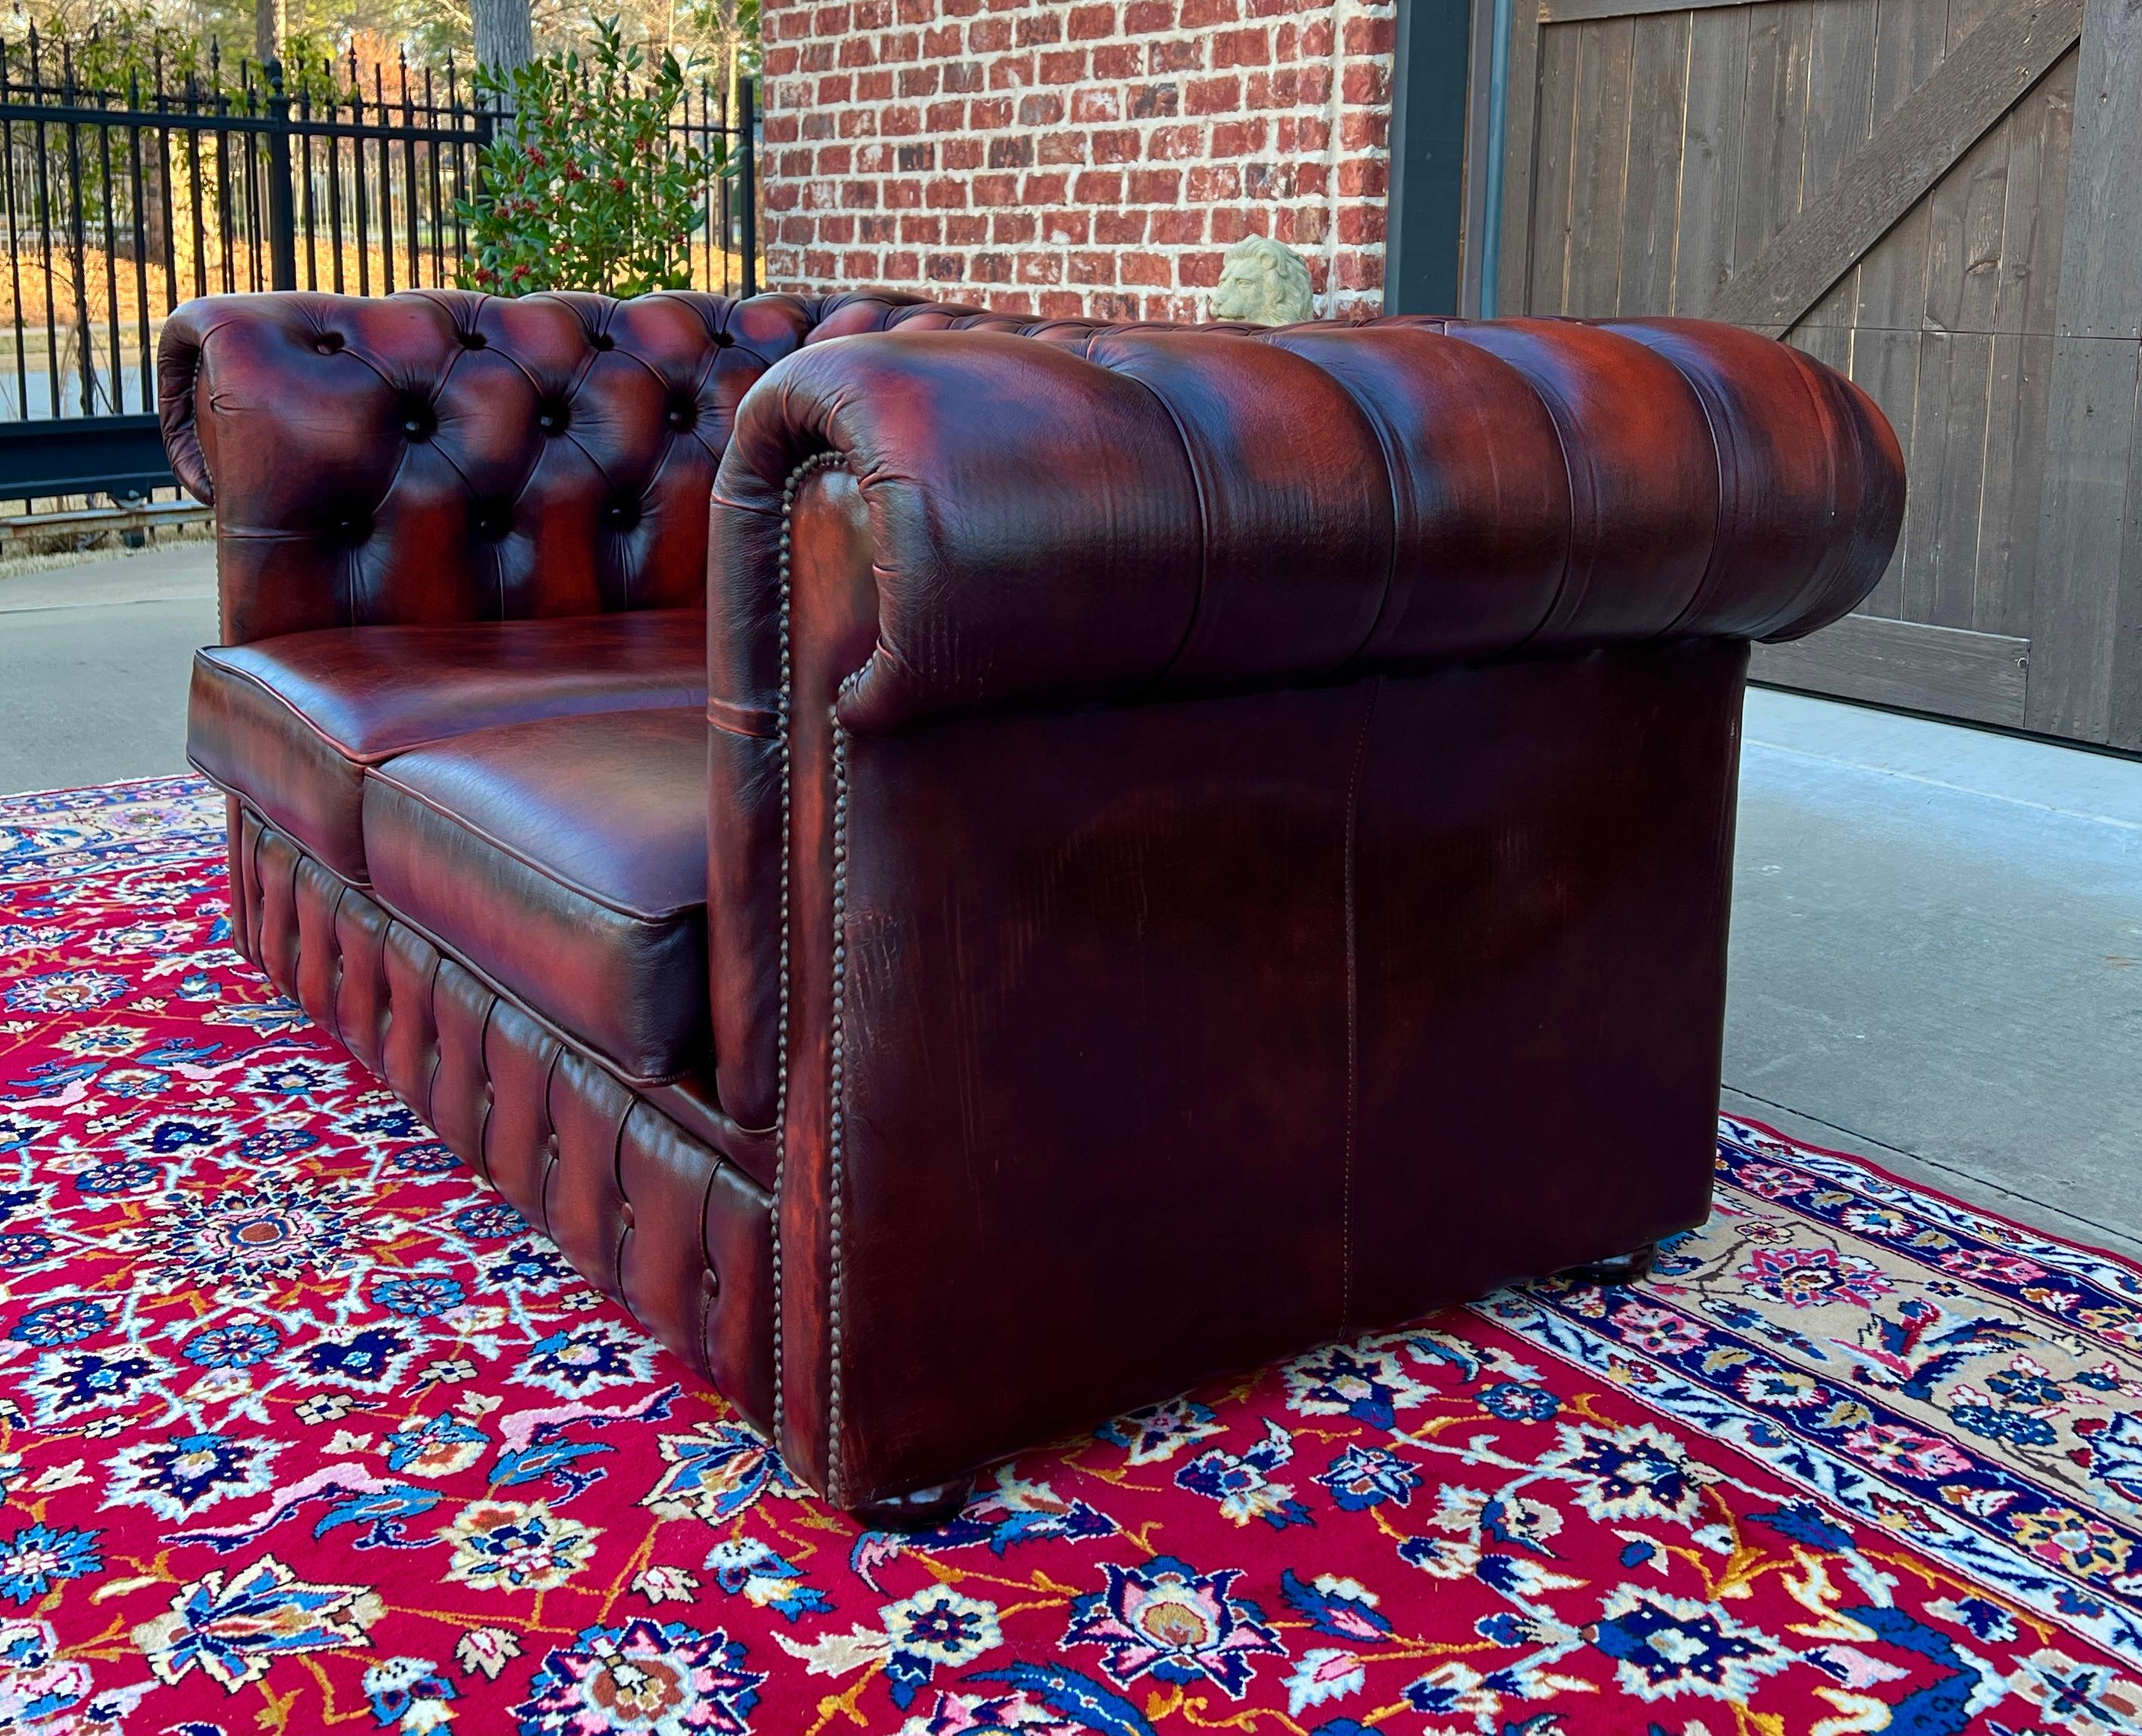 Vintage English Chesterfield Leather Tufted Love Seat Sofa Oxblood Red #2 2